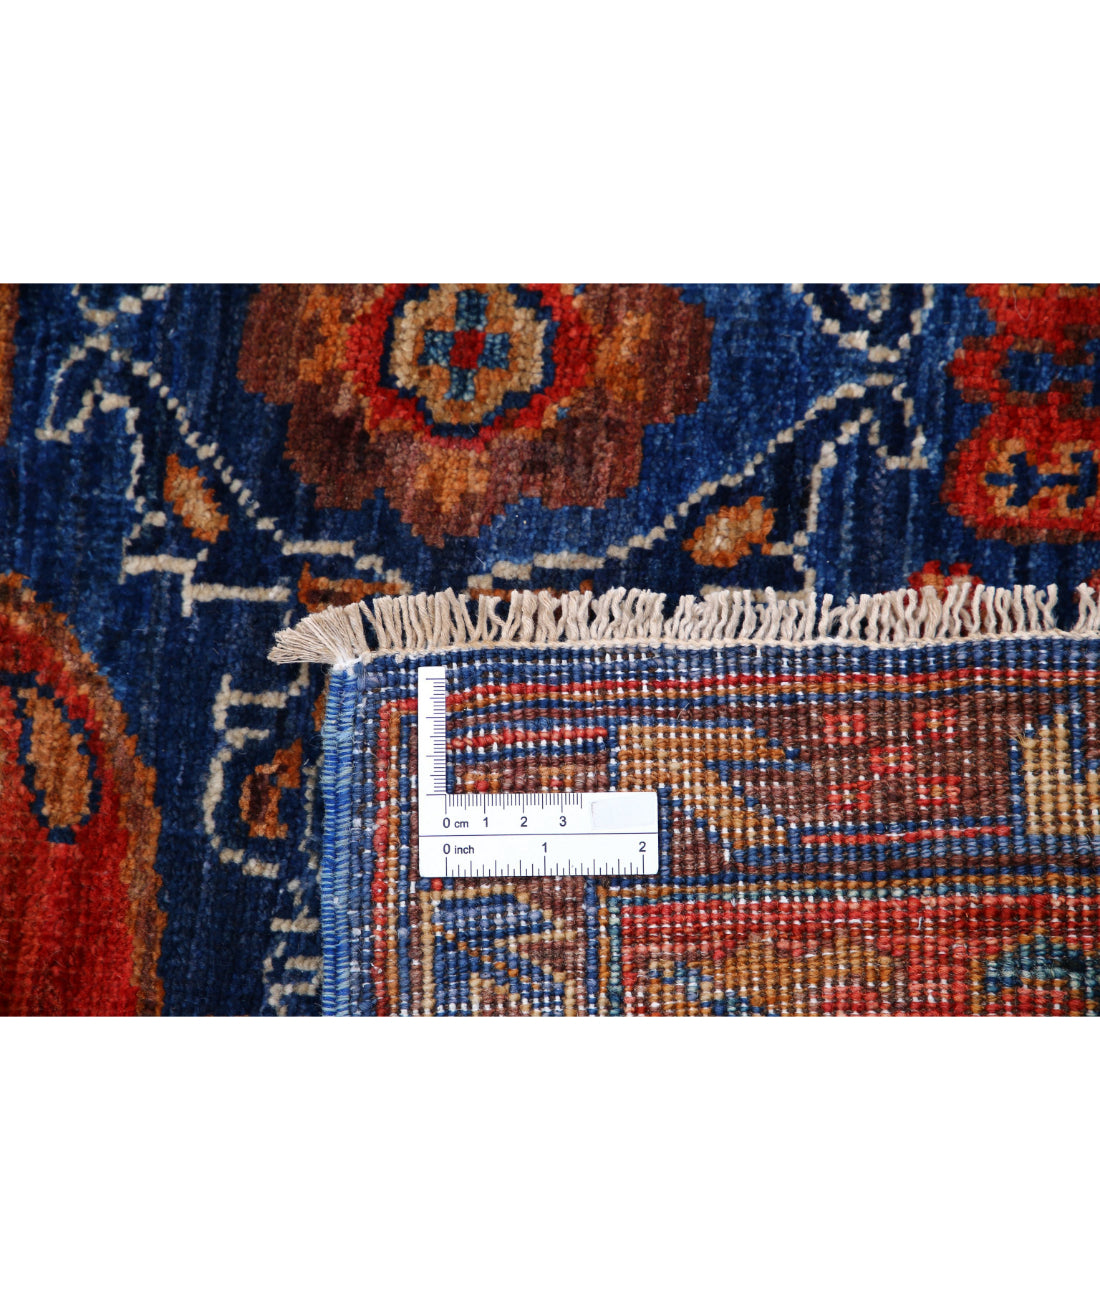 Hand Knotted Nomadic Caucasian Humna Wool Rug - 4'11'' x 6'9'' 4'11'' x 6'9'' (148 X 203) / Blue / Red